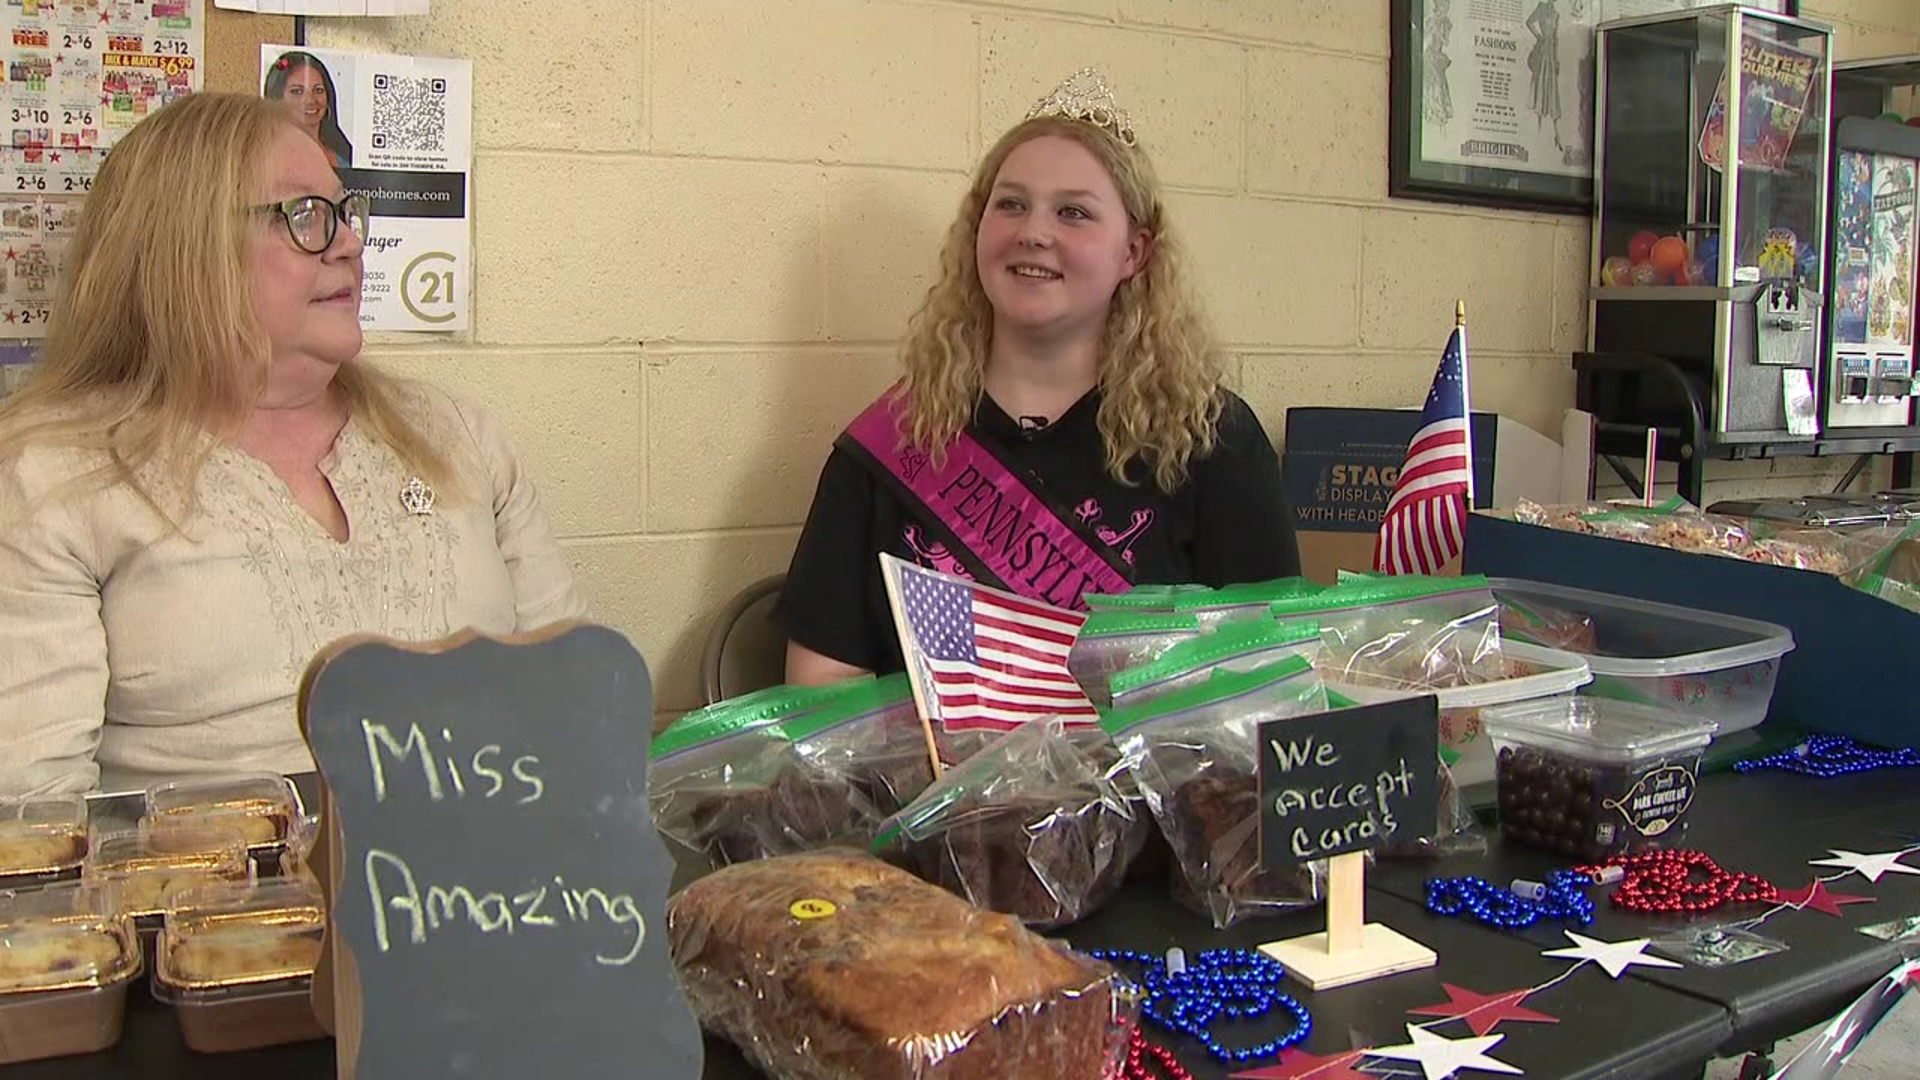 A young woman from Carbon County will soon represent the Keystone State at the National Miss Amazing Summit in Chicago.